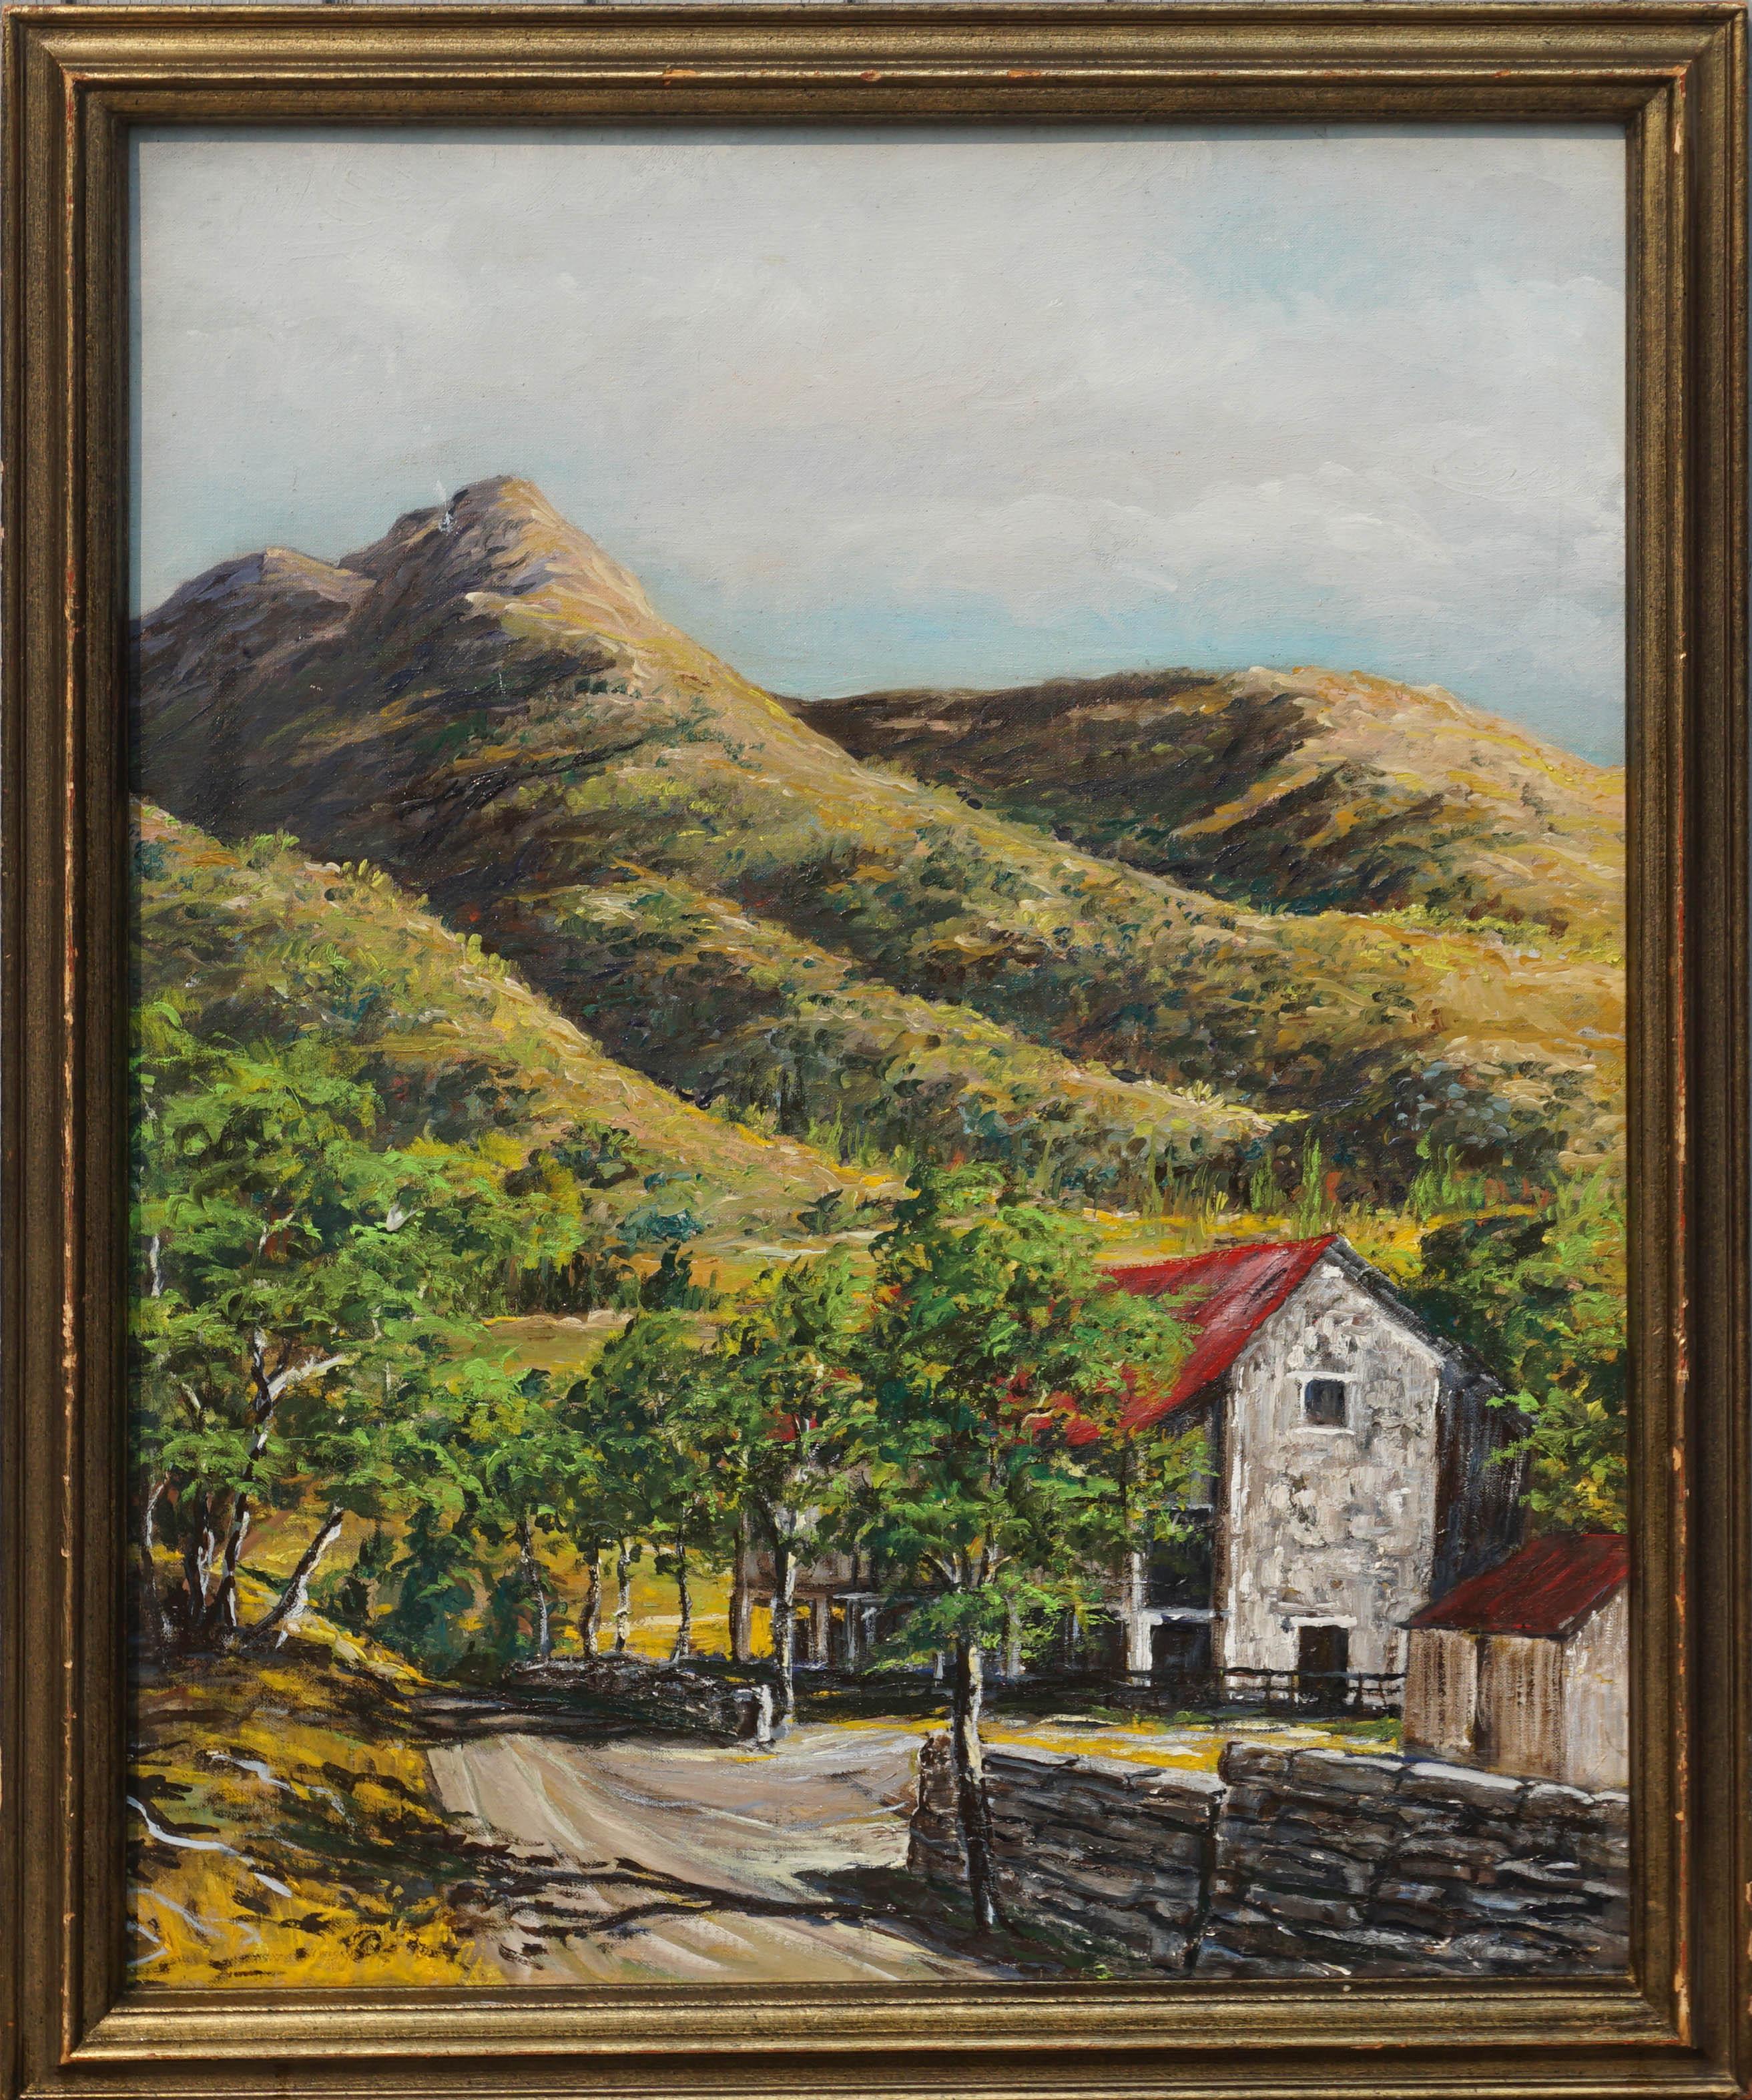  Stone Barn in Foothills, Mid Century Pastoral Landscape